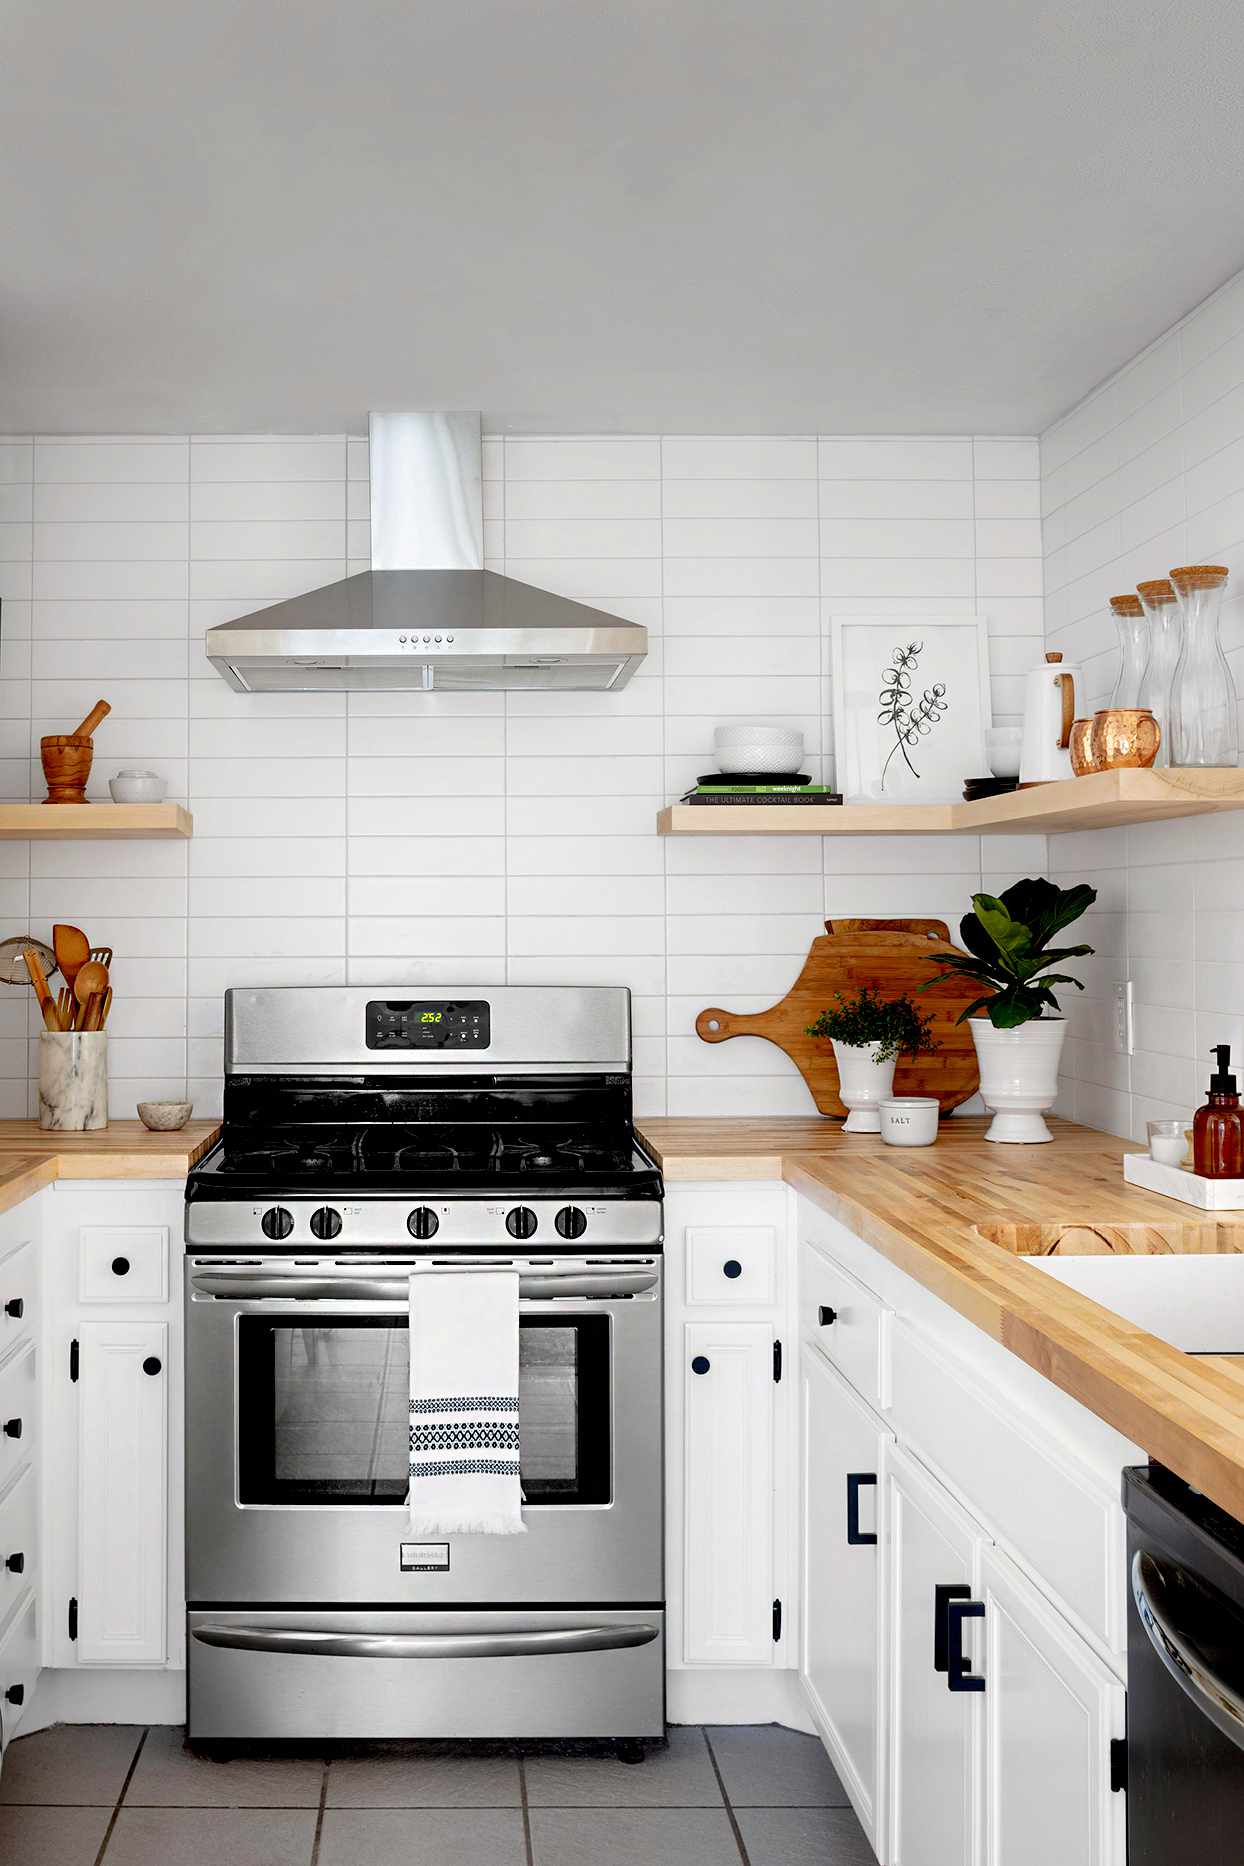 Our Favorite Budget Kitchen Remodeling Ideas Under $20,20   Better ...